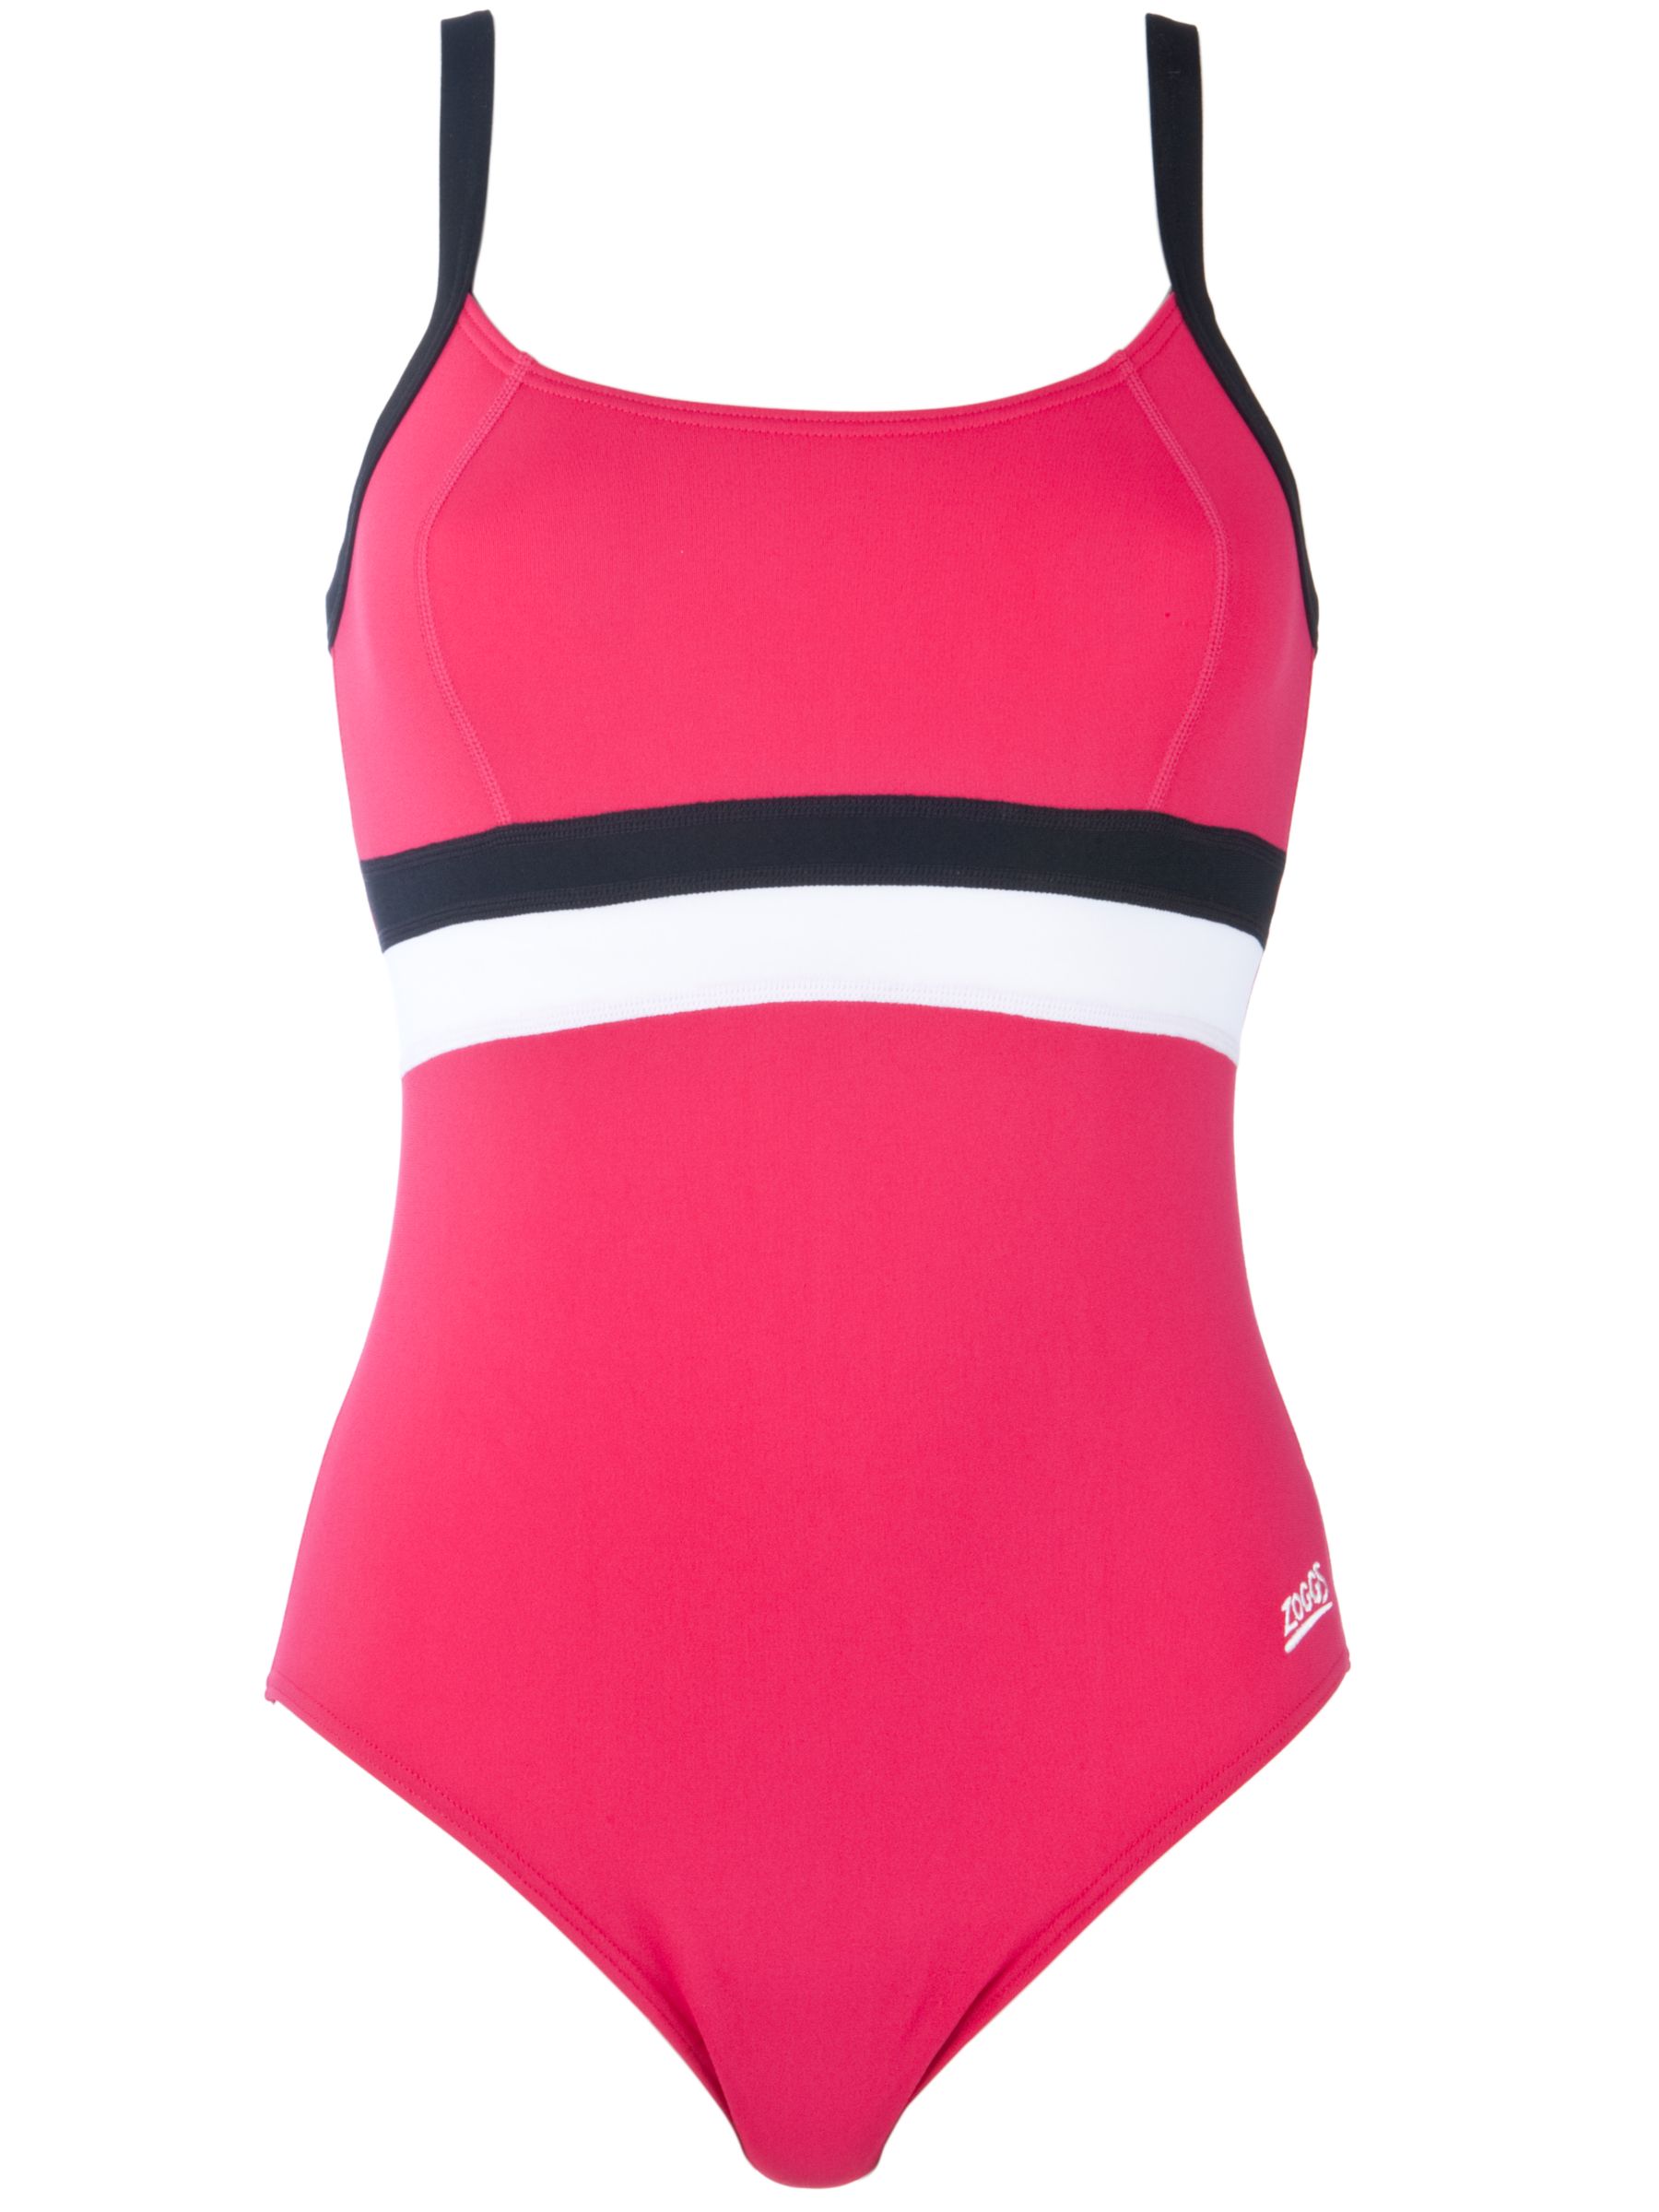 Zoggs Torquay Scoopback One Piece Swimsuit, Pink